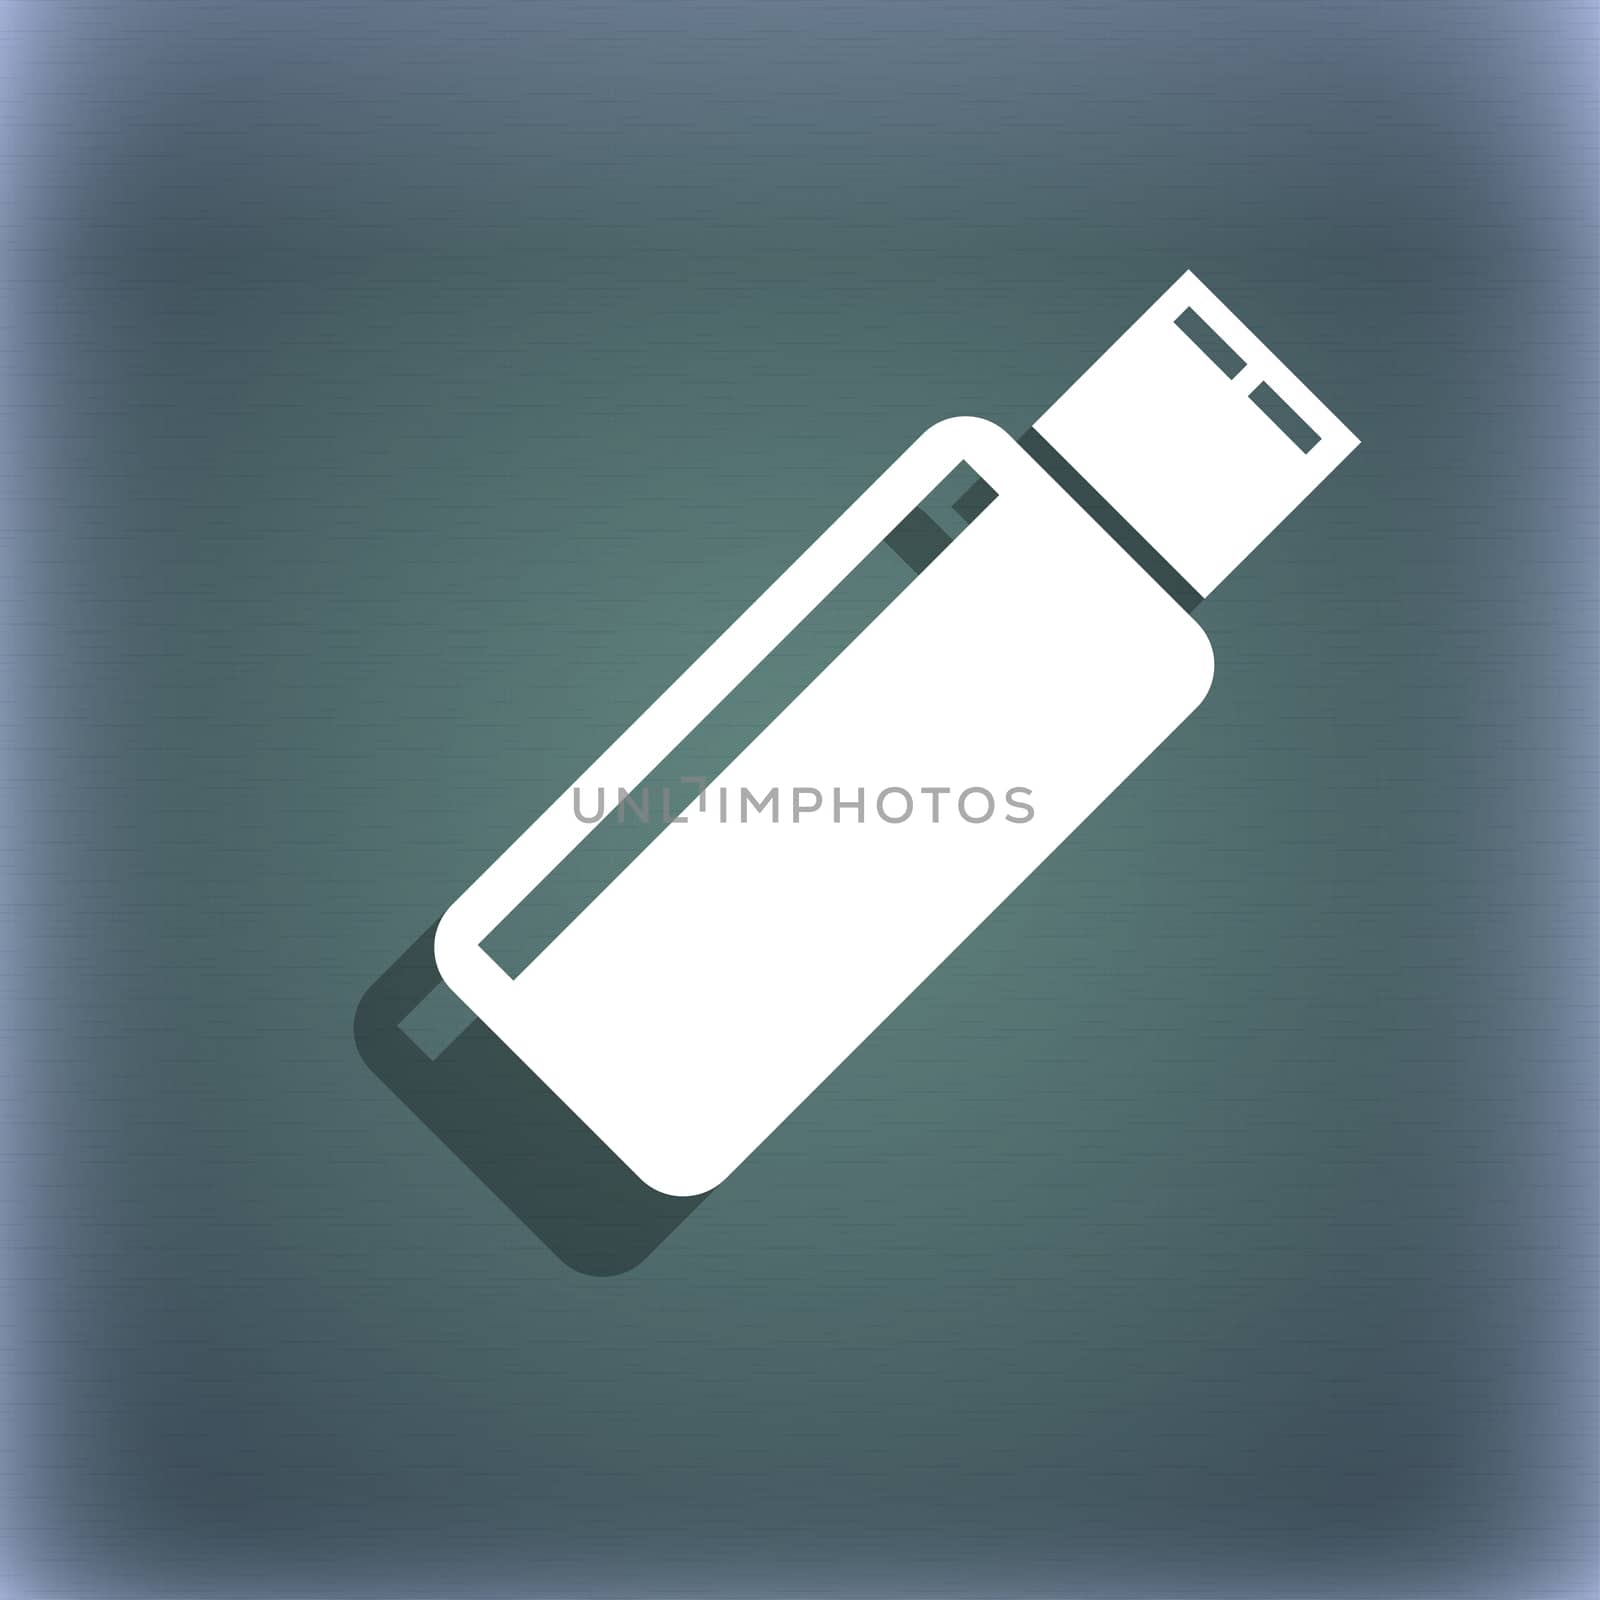 Usb sign icon. flash drive stick symbol. On the blue-green abstract background with shadow and space for your text.  by serhii_lohvyniuk